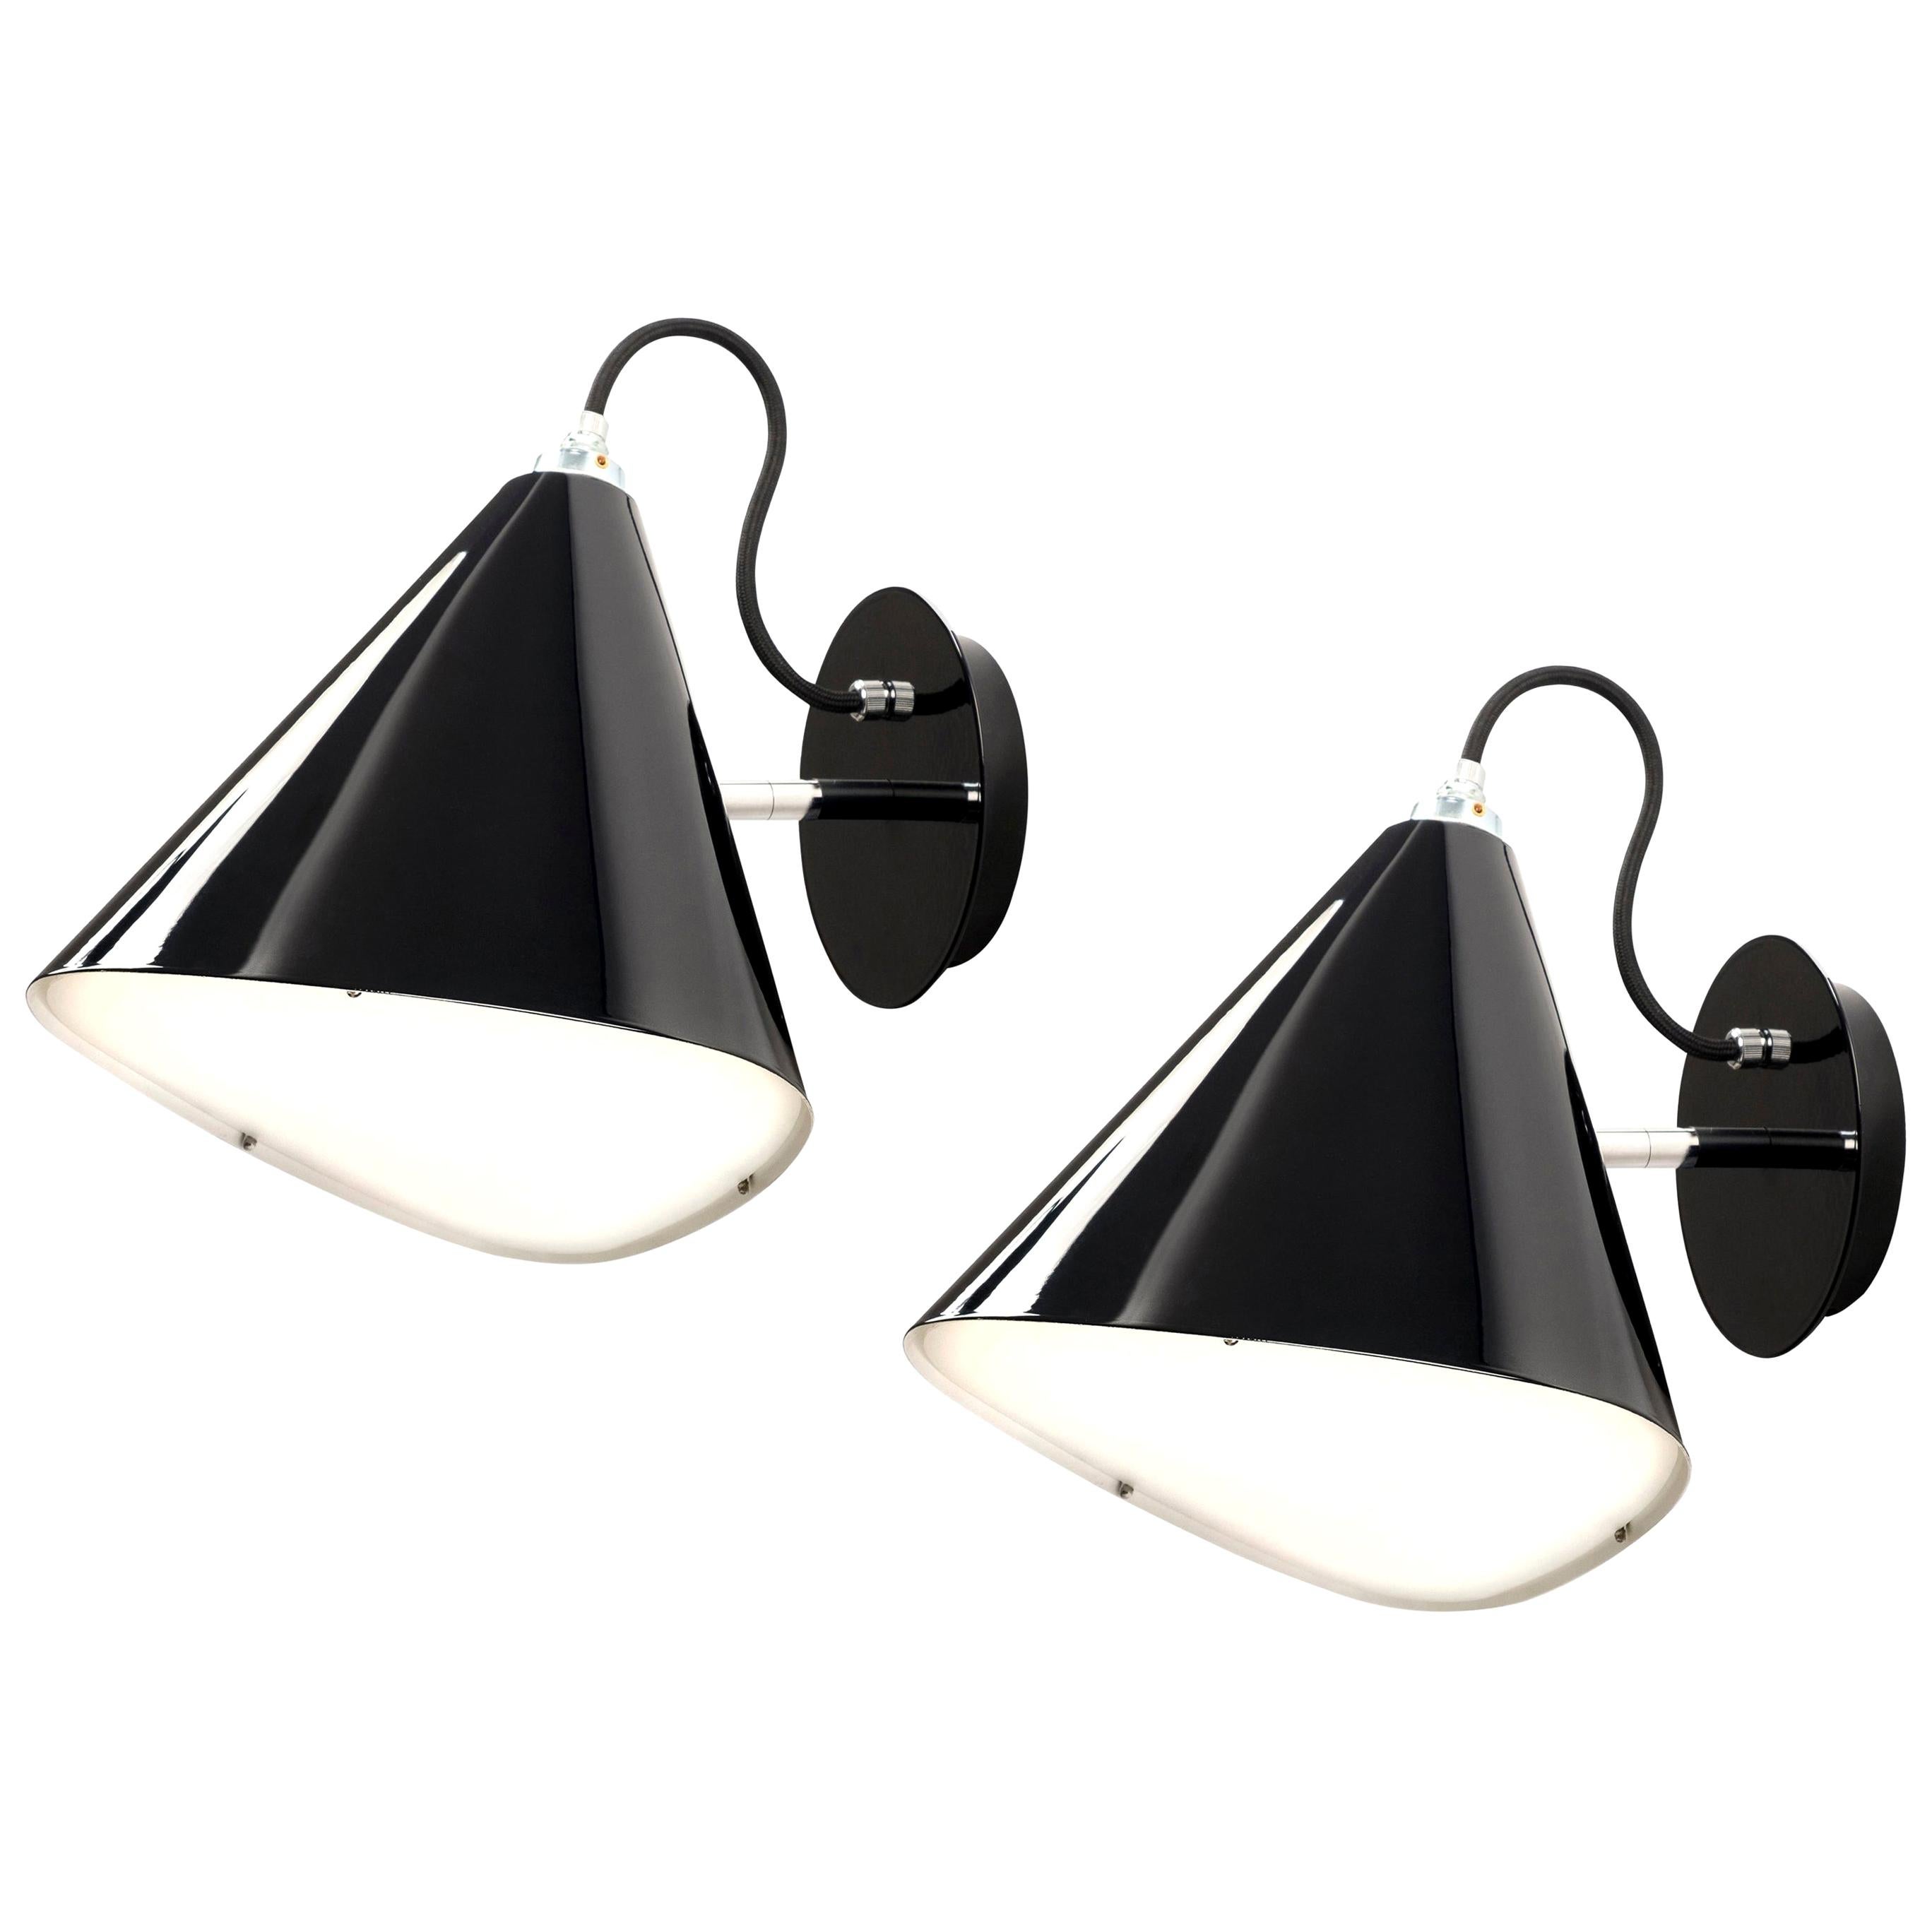 Pair of Daniel Becker Emily Wall Lights in Ultra Glossy Black for Moss Objects